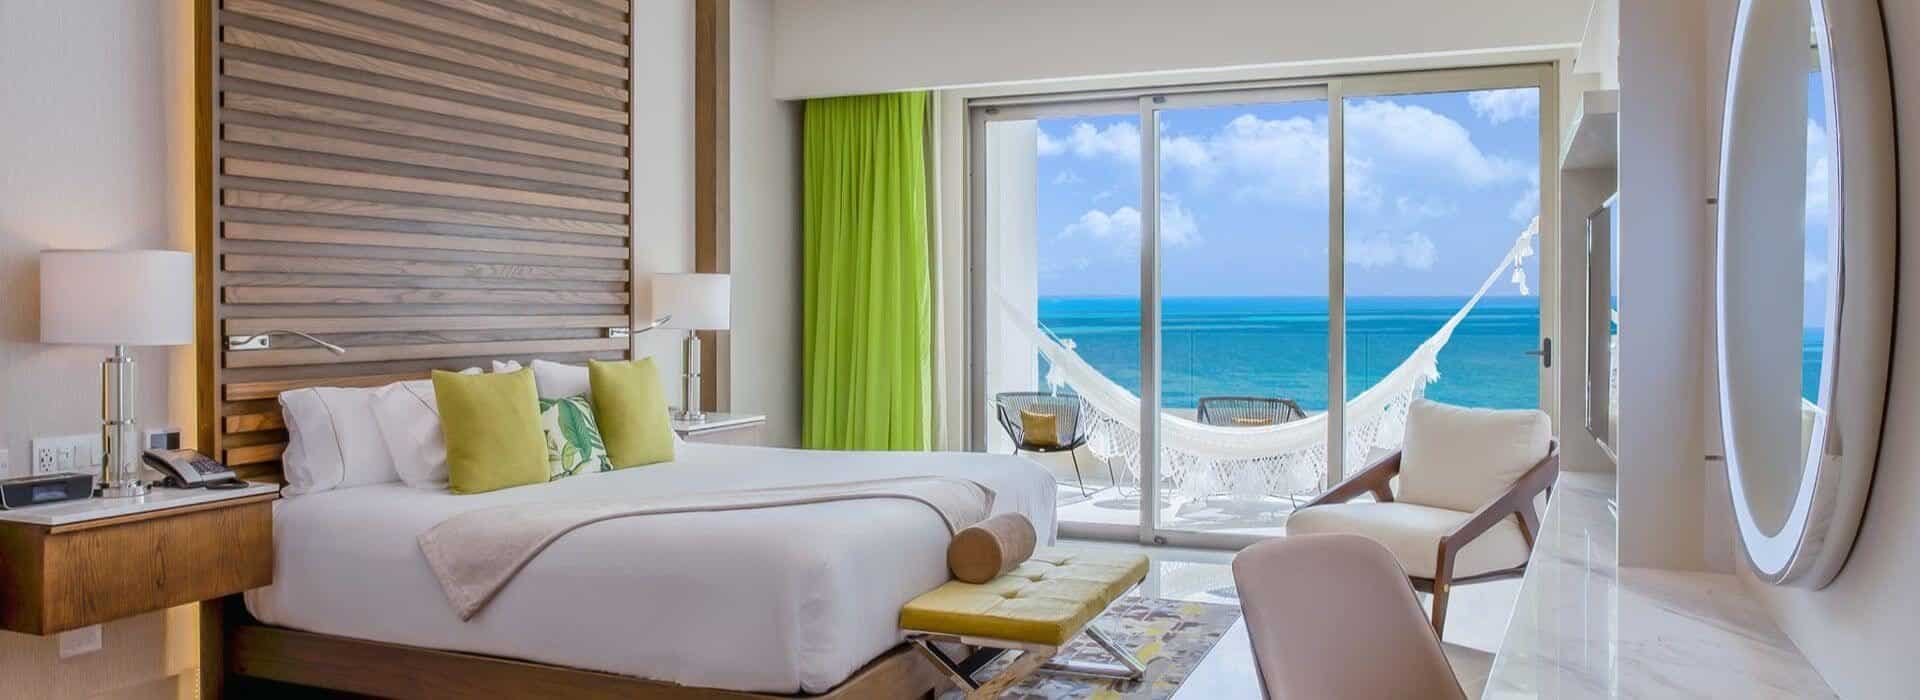 Bedroom with a king bed with white bedding and green accent pillows, nightstands on either side of the bed, a desk with chair and lighted mirror above the desk, and sliding glass doors opening to a patio with a hammock and ocean views.